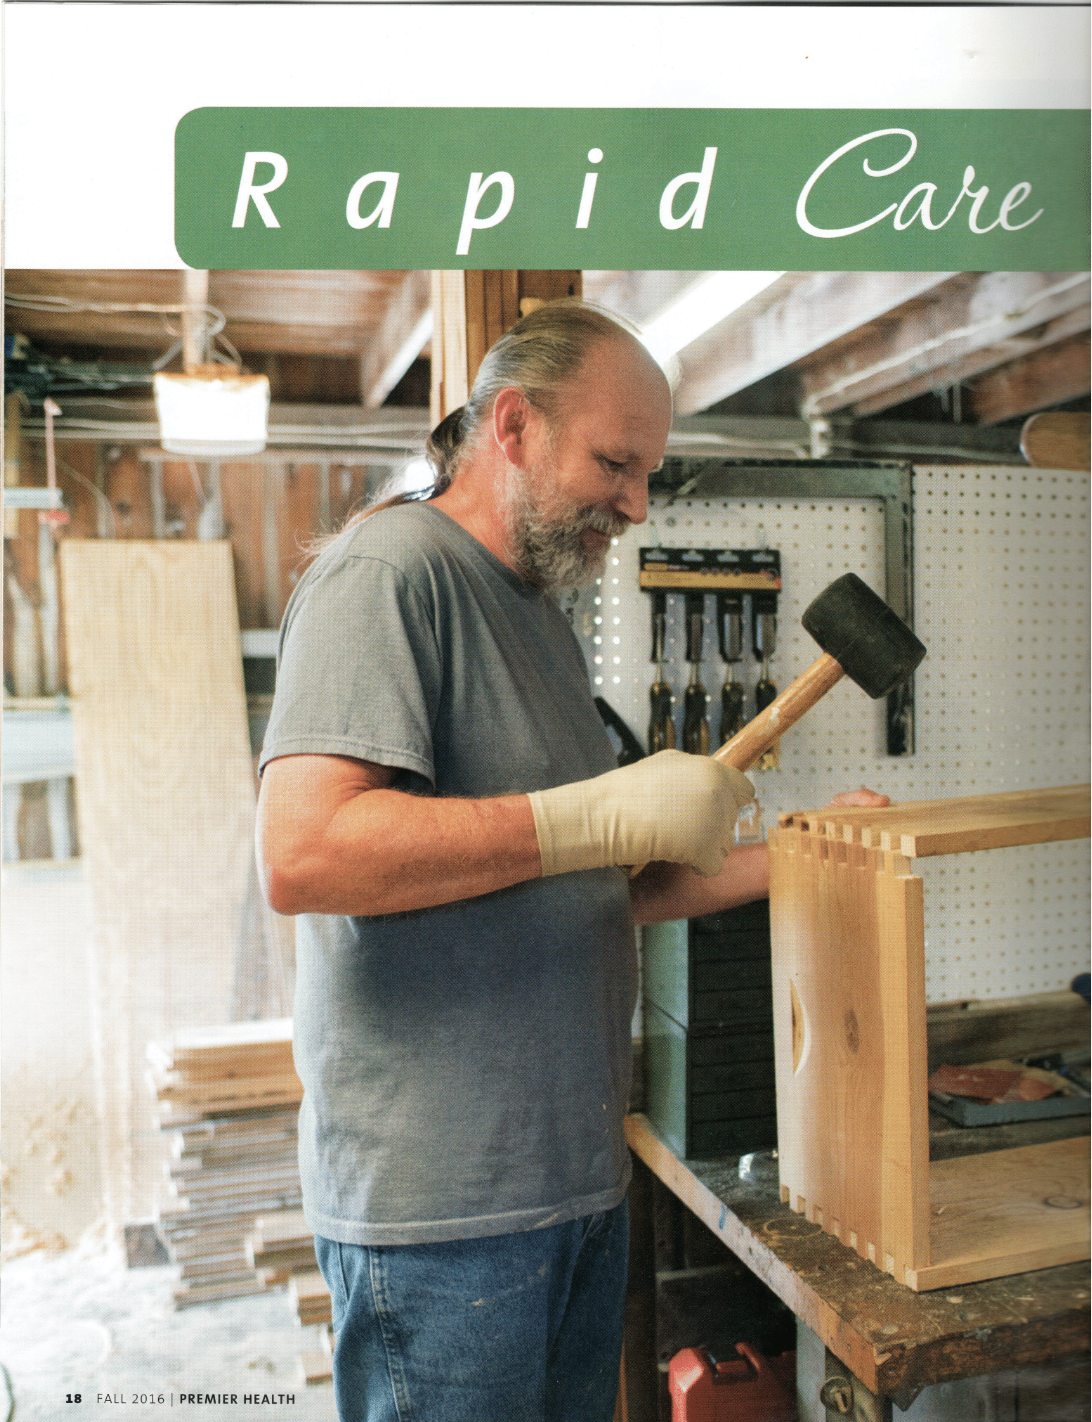 magazine page with photo of man using mallet and text Rapid Care